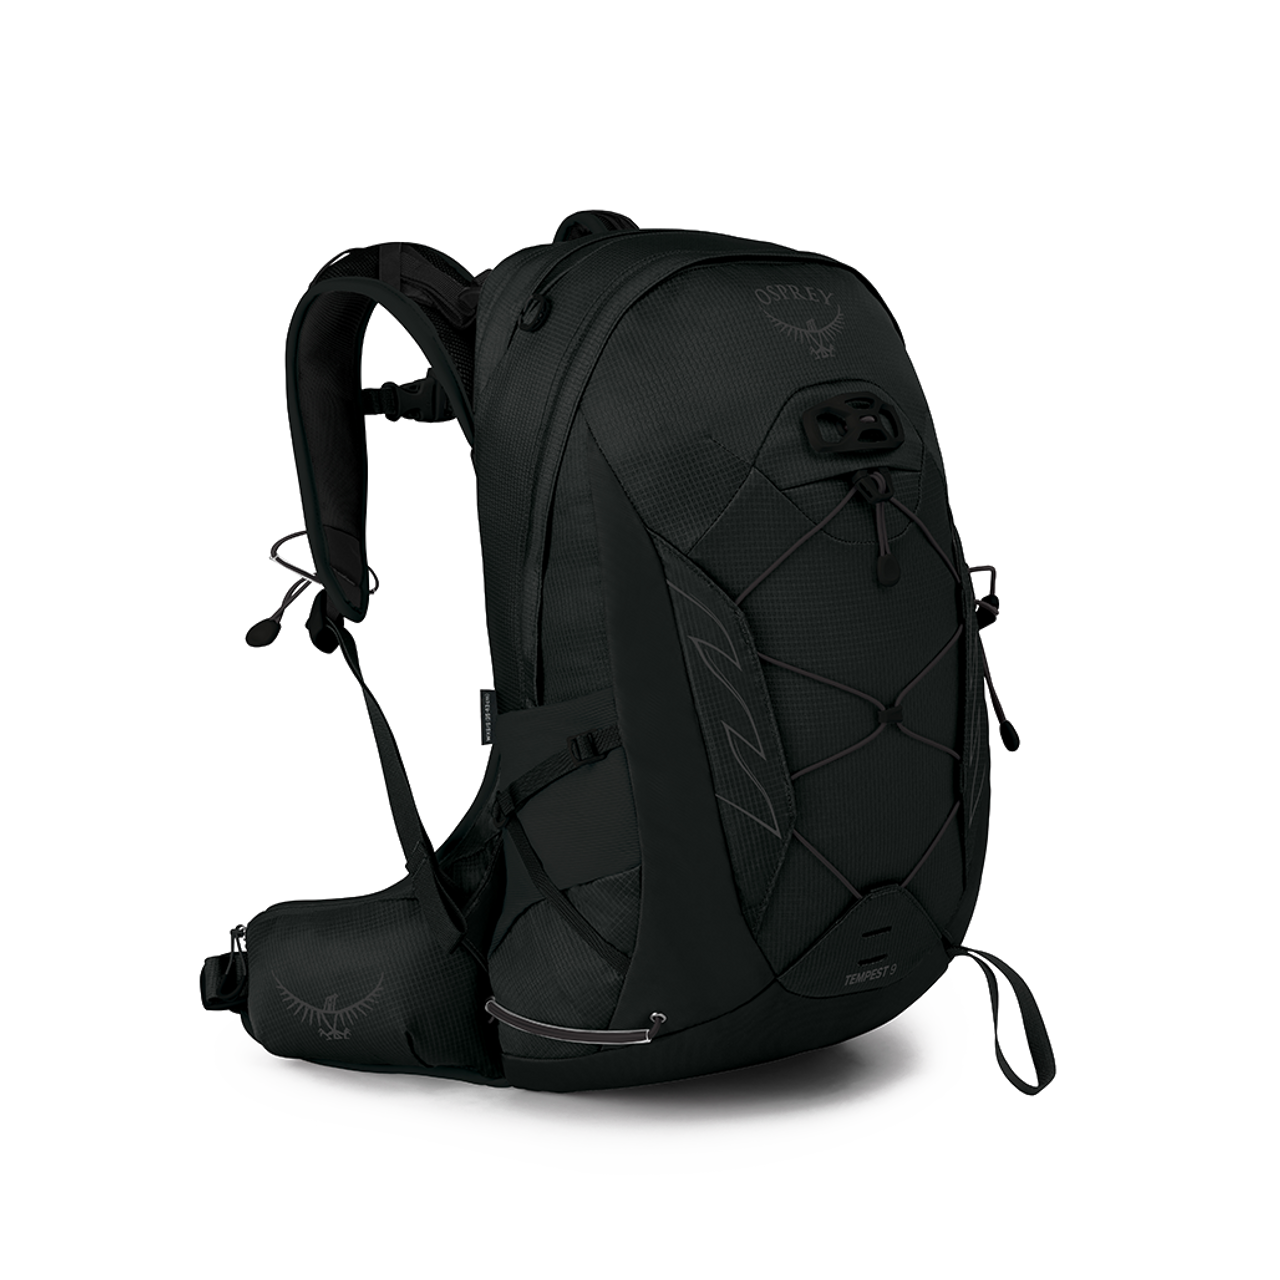 Tempest 9 Womens Daypack